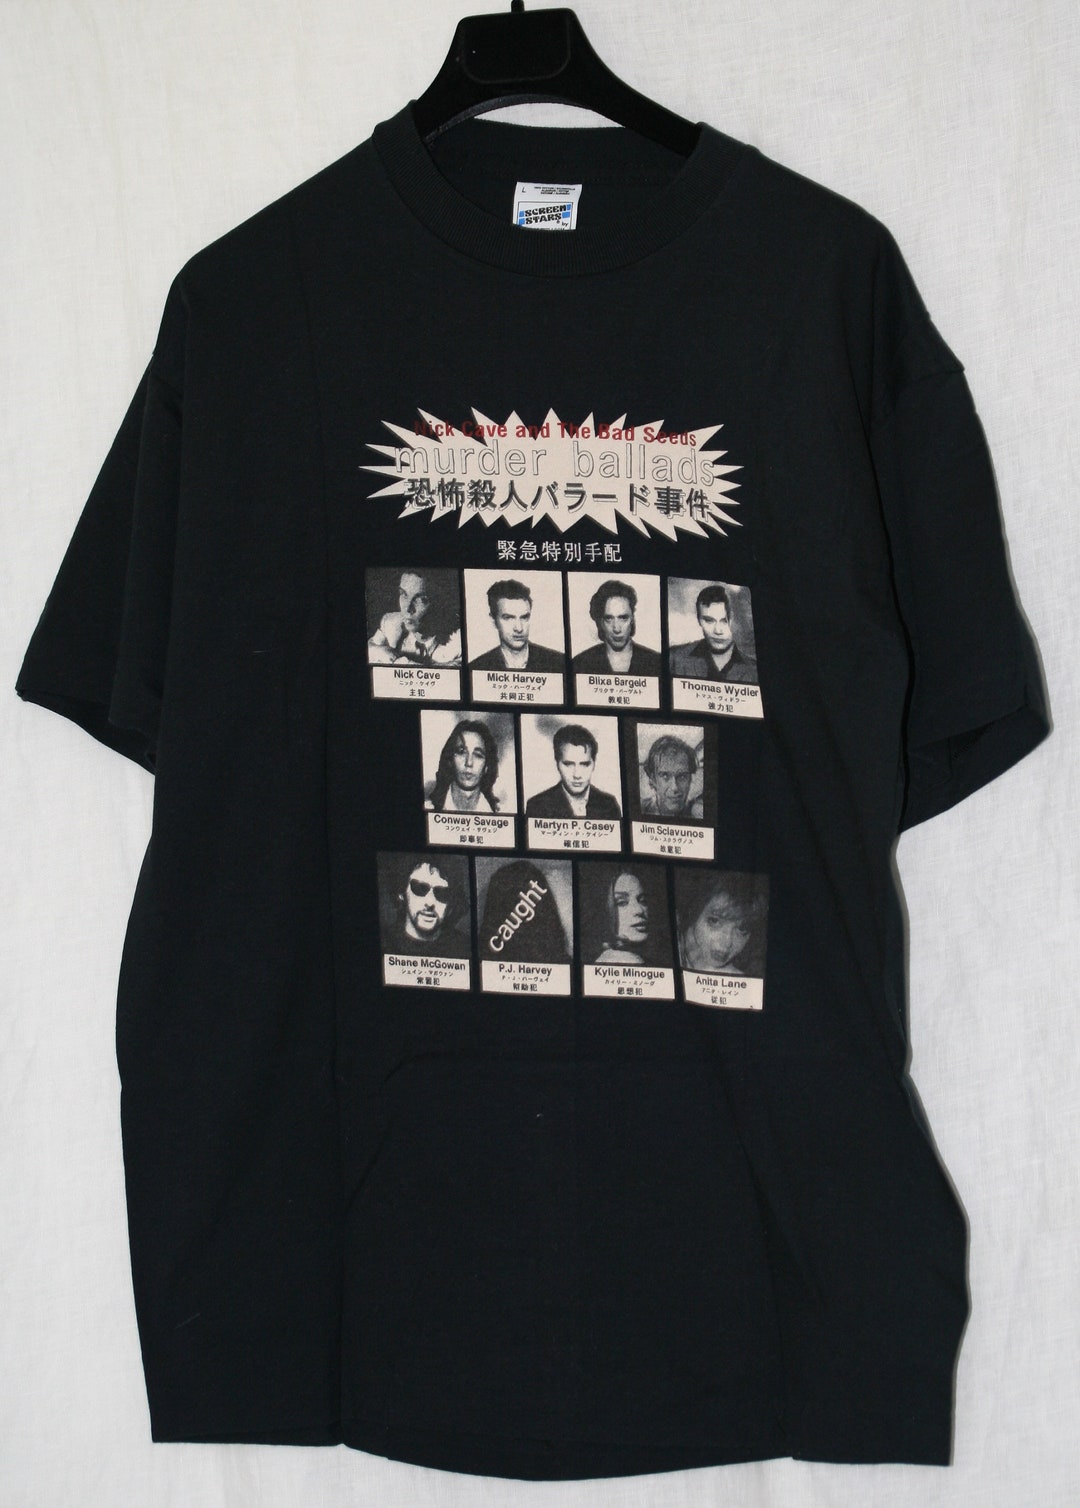 Association ambition Trolley Vintage 1996 NICK CAVE and the Bad Seeds Tour T-shirt - Etsy